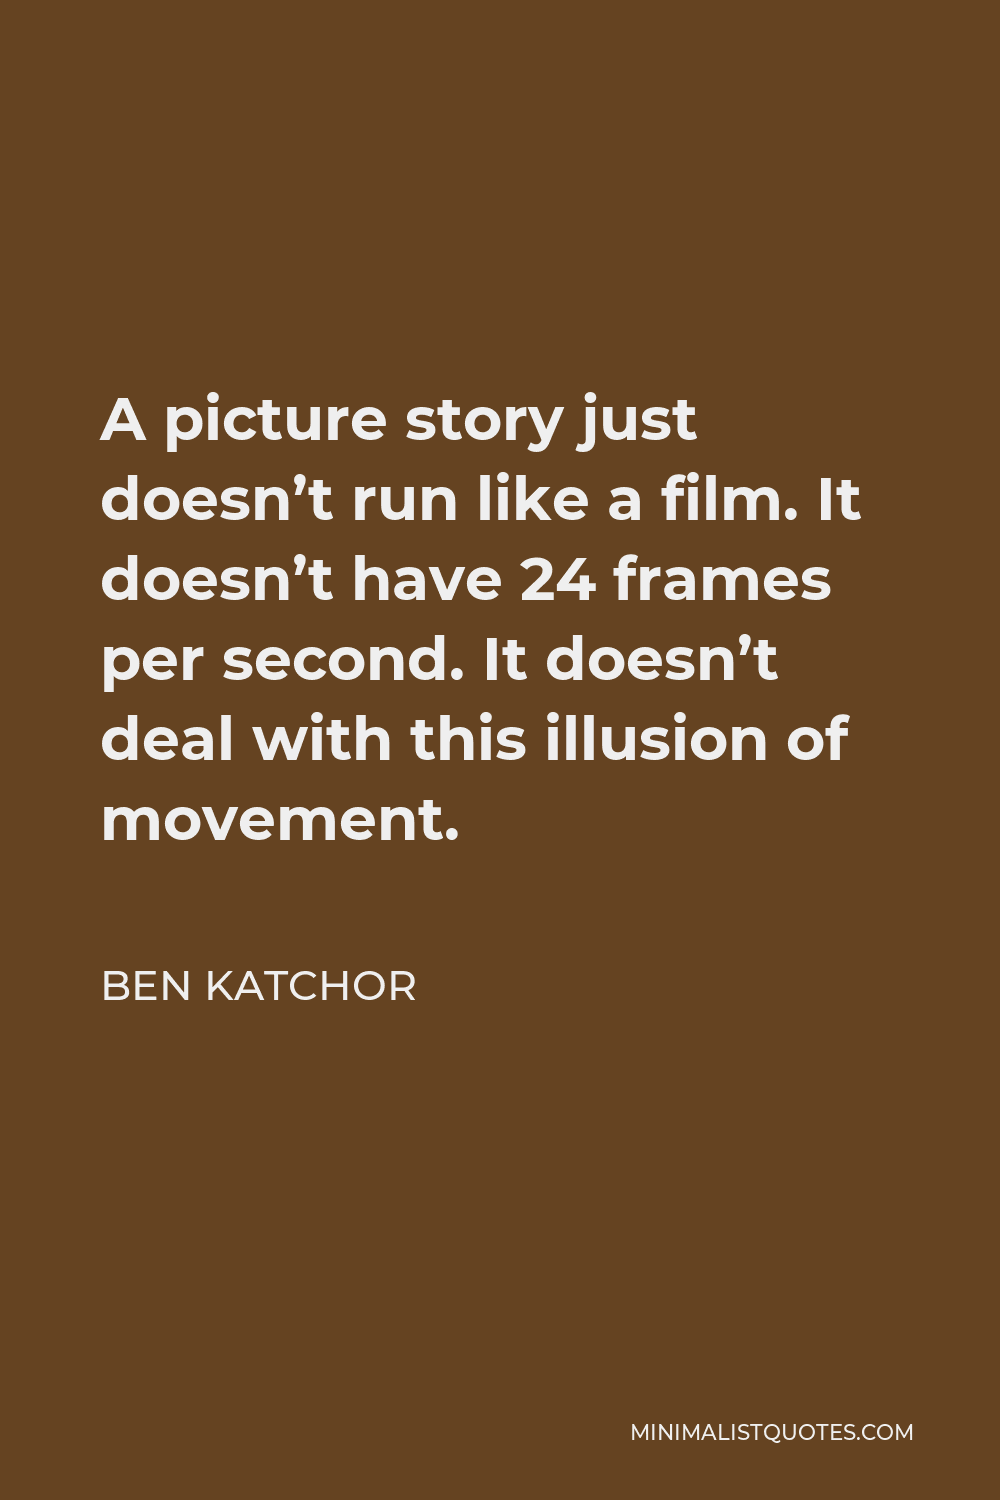 Ben Katchor Quote - A picture story just doesn’t run like a film. It doesn’t have 24 frames per second. It doesn’t deal with this illusion of movement. It’s more like if you did an illuminated novel.